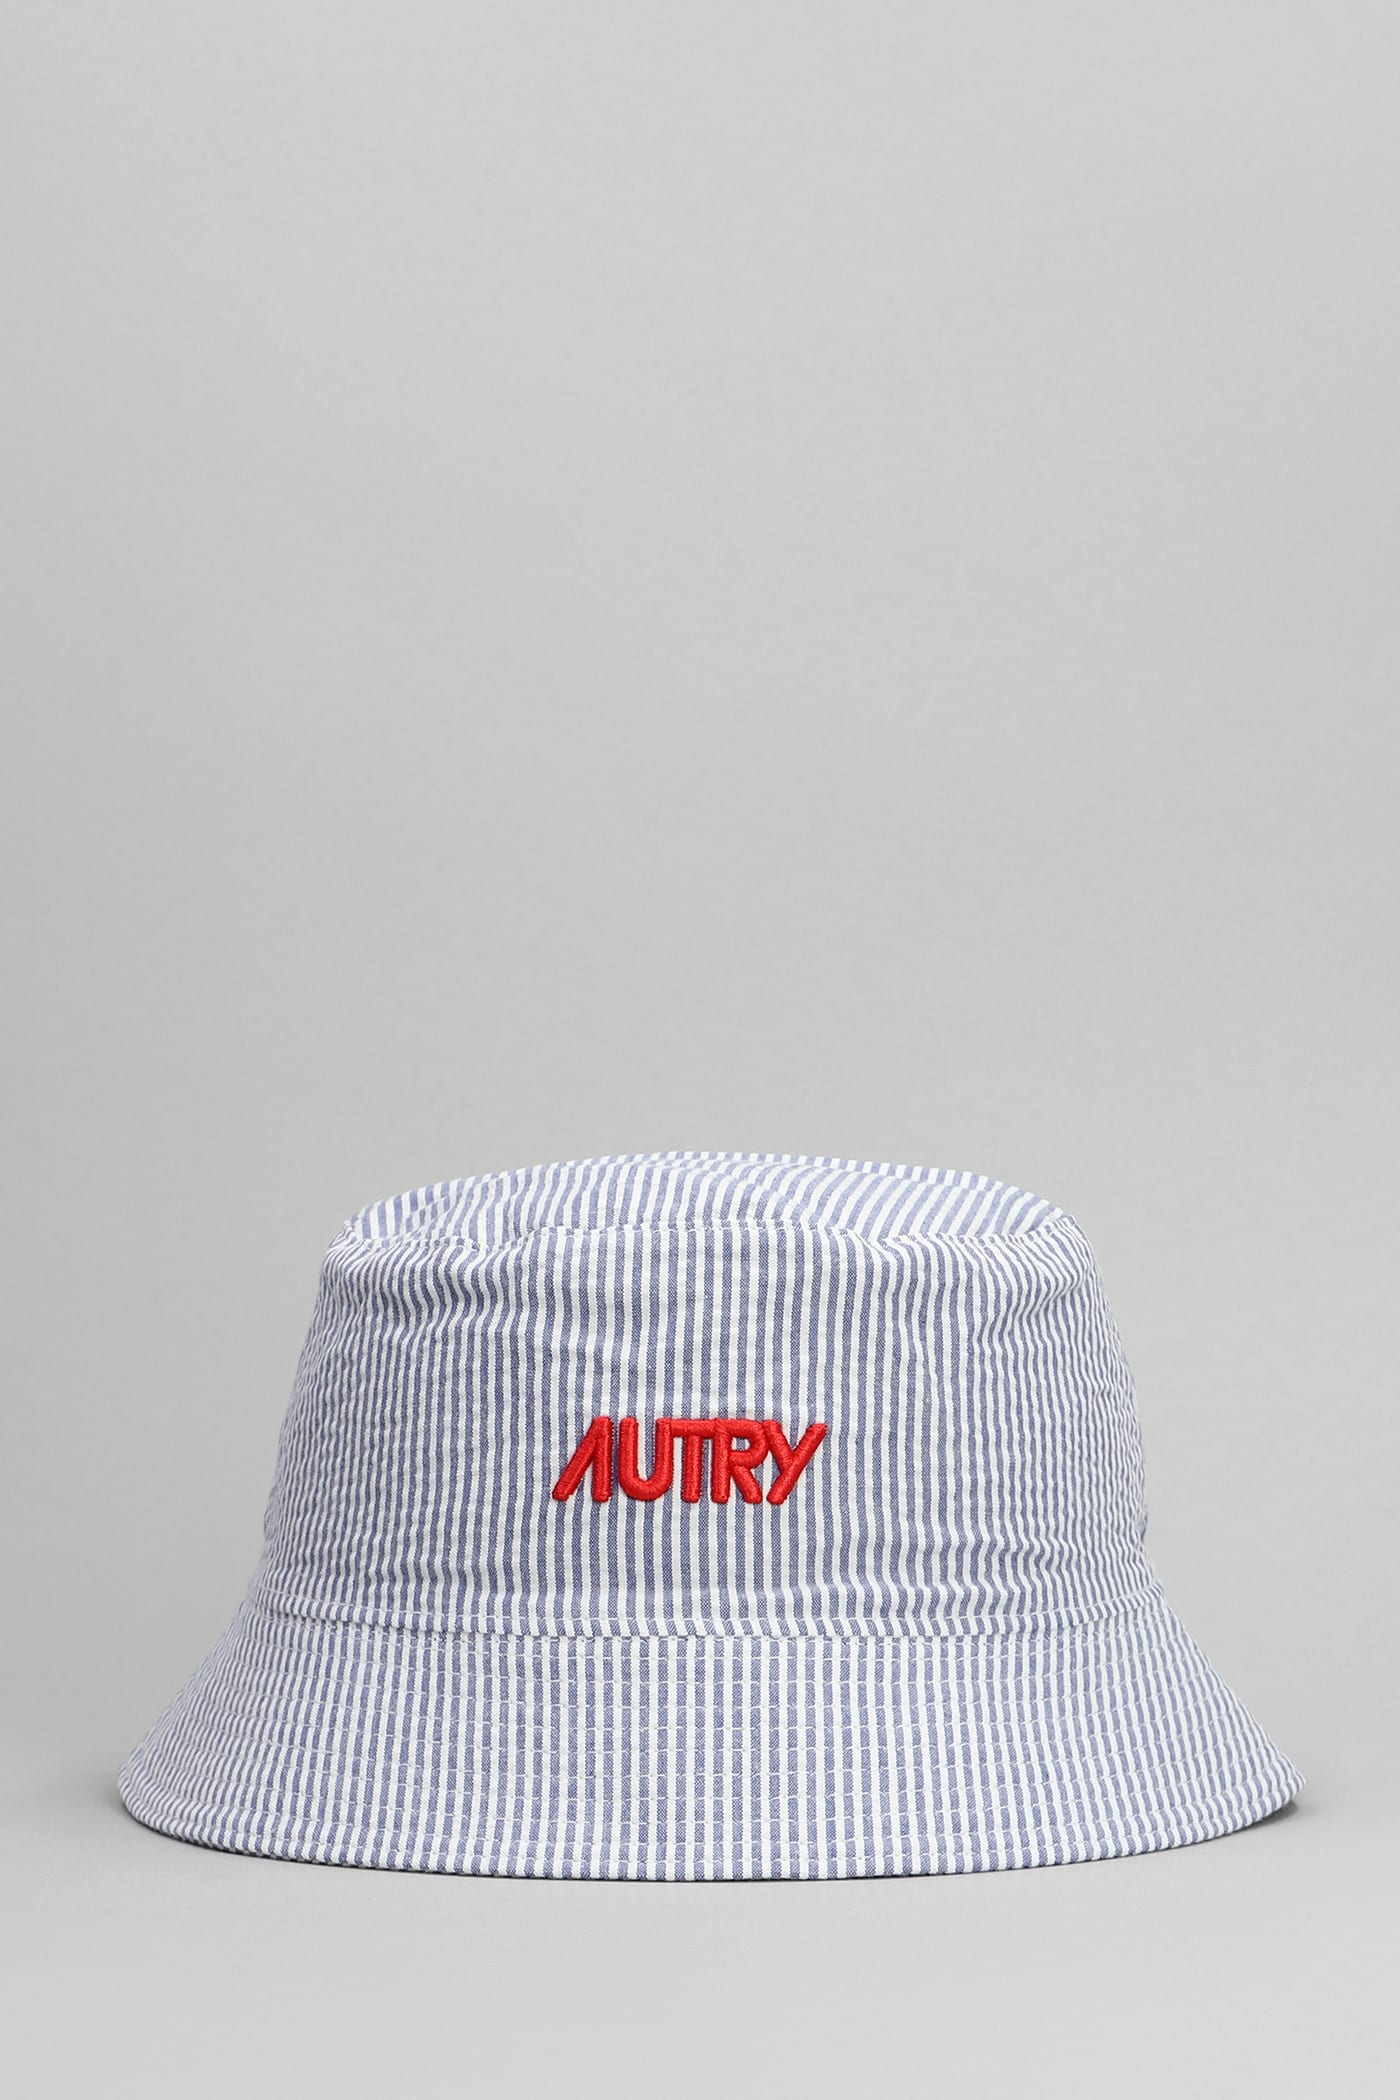 Hats In White Cotton